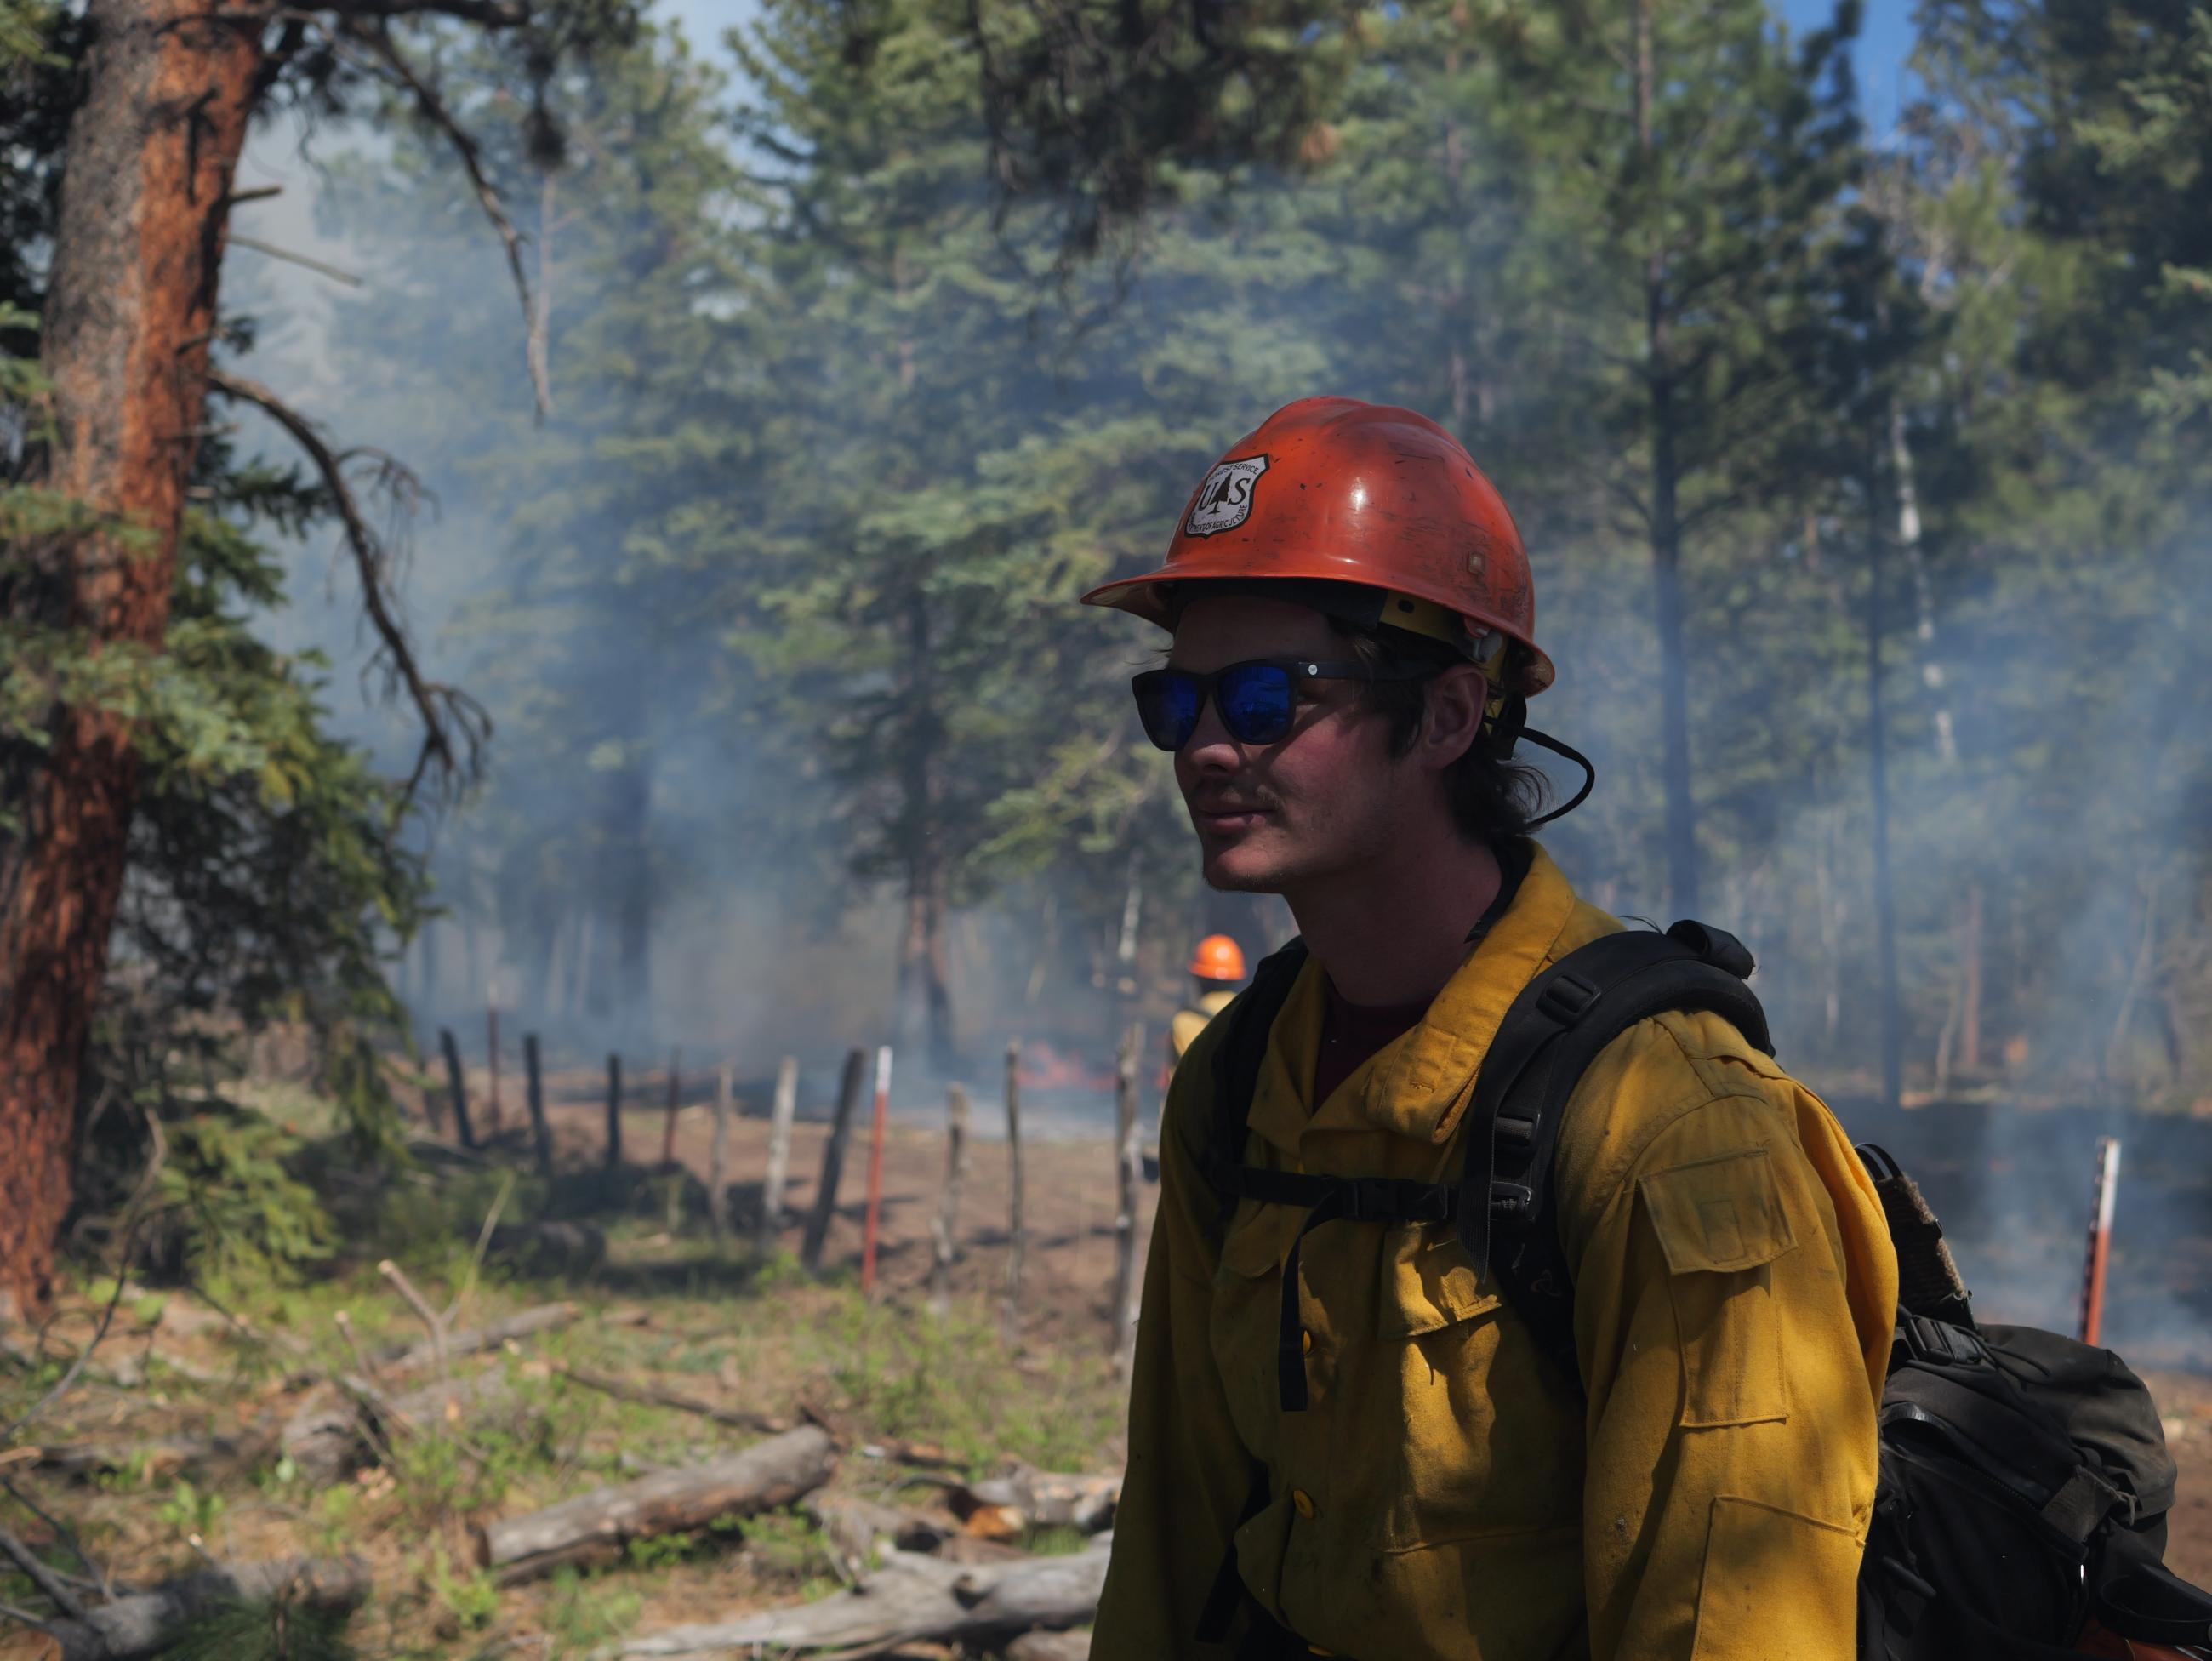 A firefighter in an orange helmet "watches the green", the unburned area of the forest on one side of the fire line.